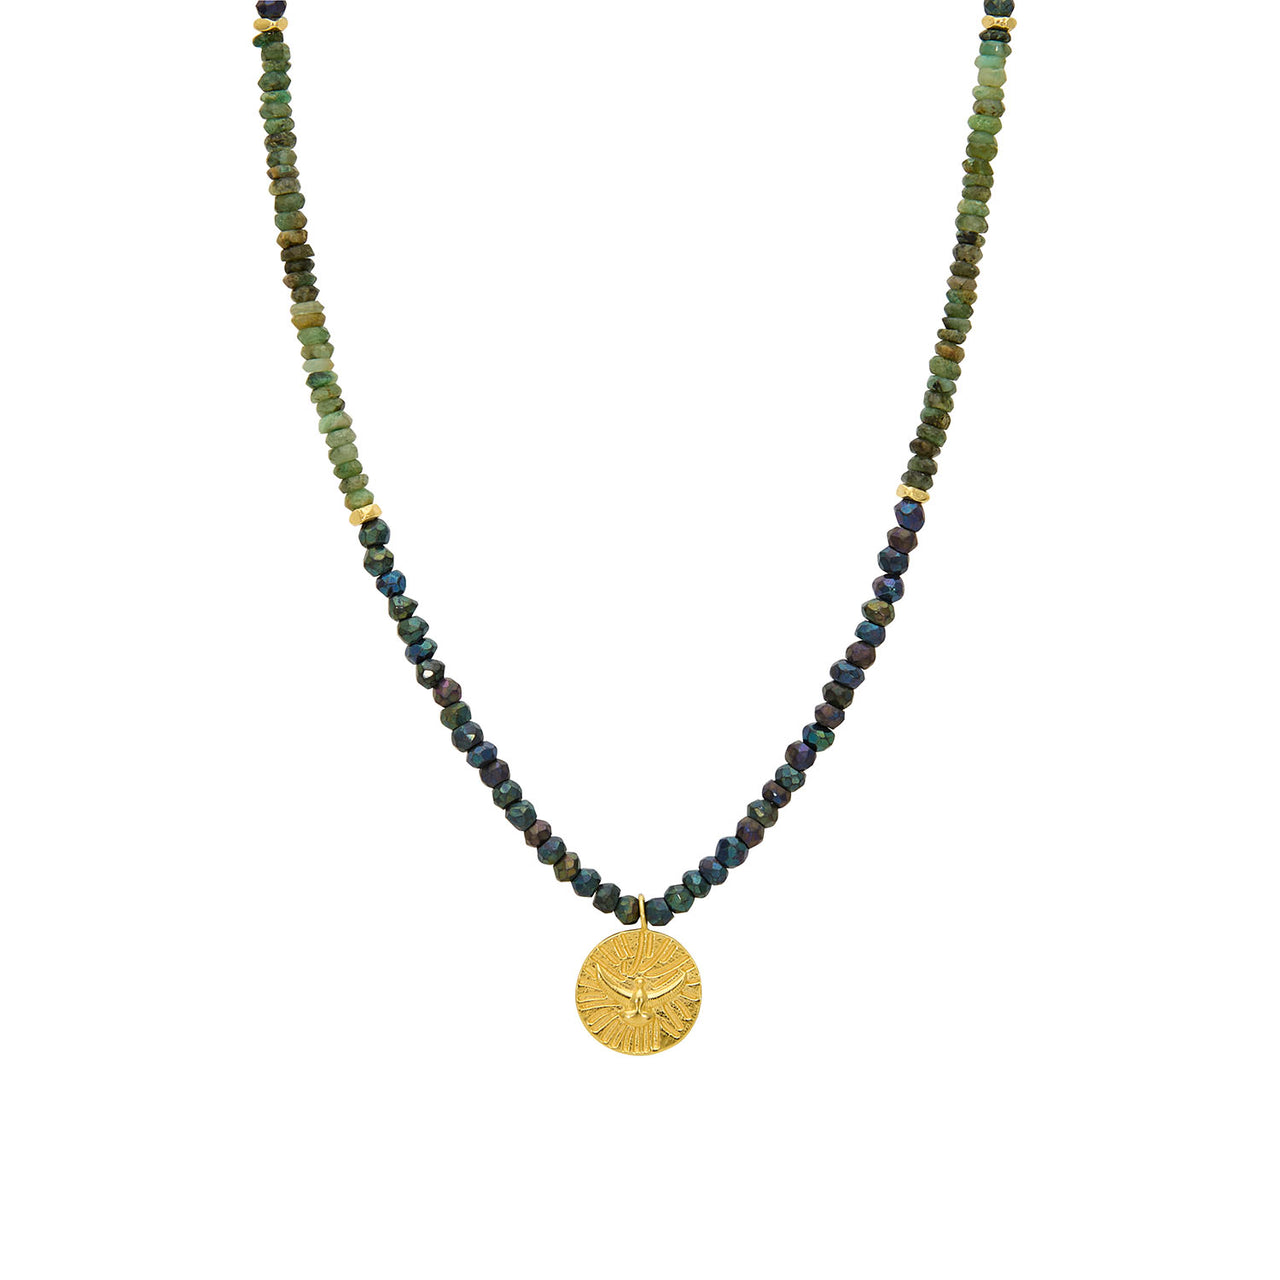 ARTIC GREEN PYRITE NECKLACE